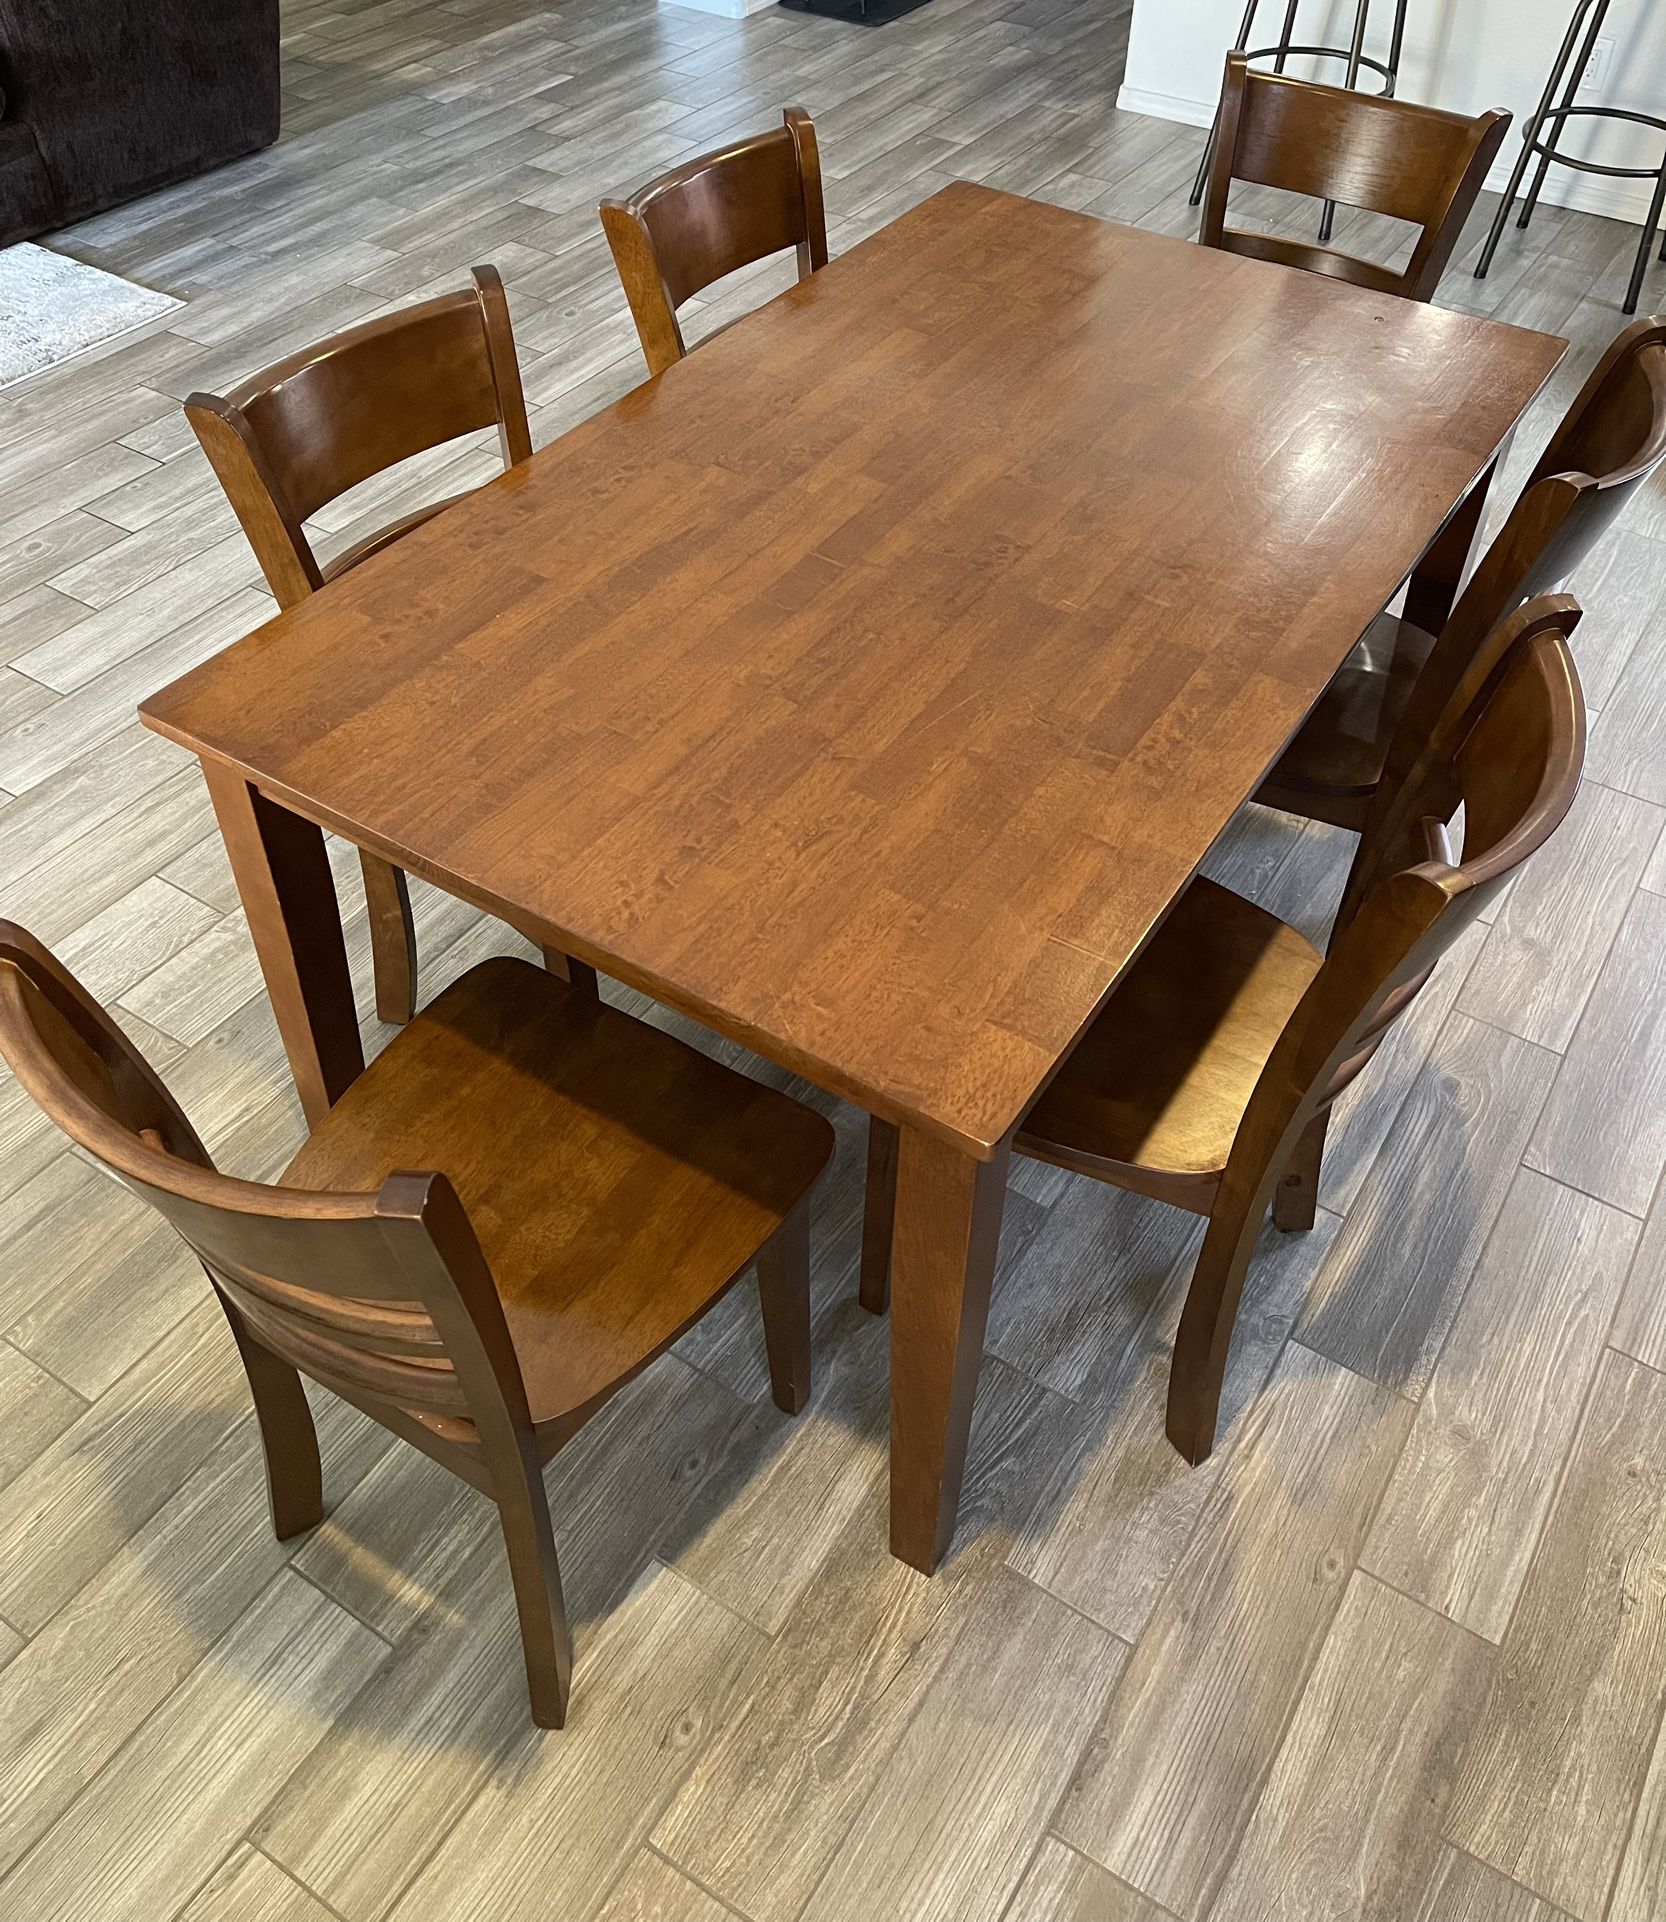 Wood Dining Room Table - With 6 Matching Chairs